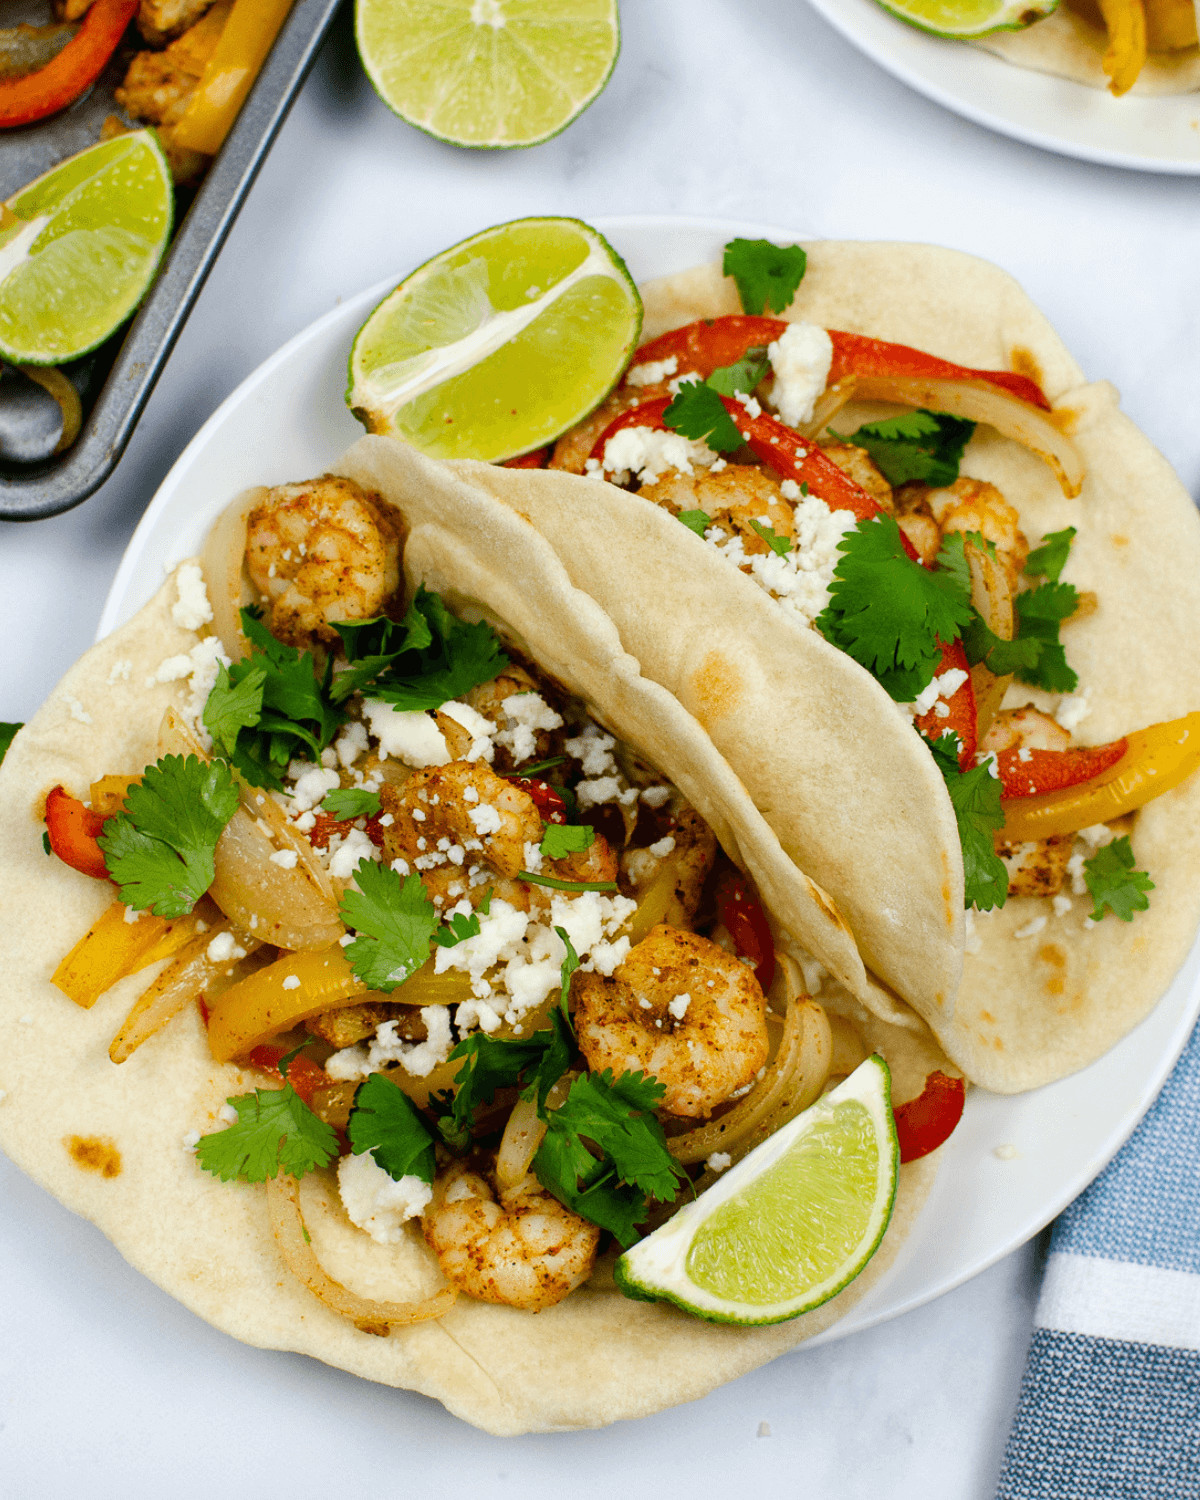 Two shrimp fajitas with bell peppers, cilantro, and lime wedges on a white plate, shot from above.